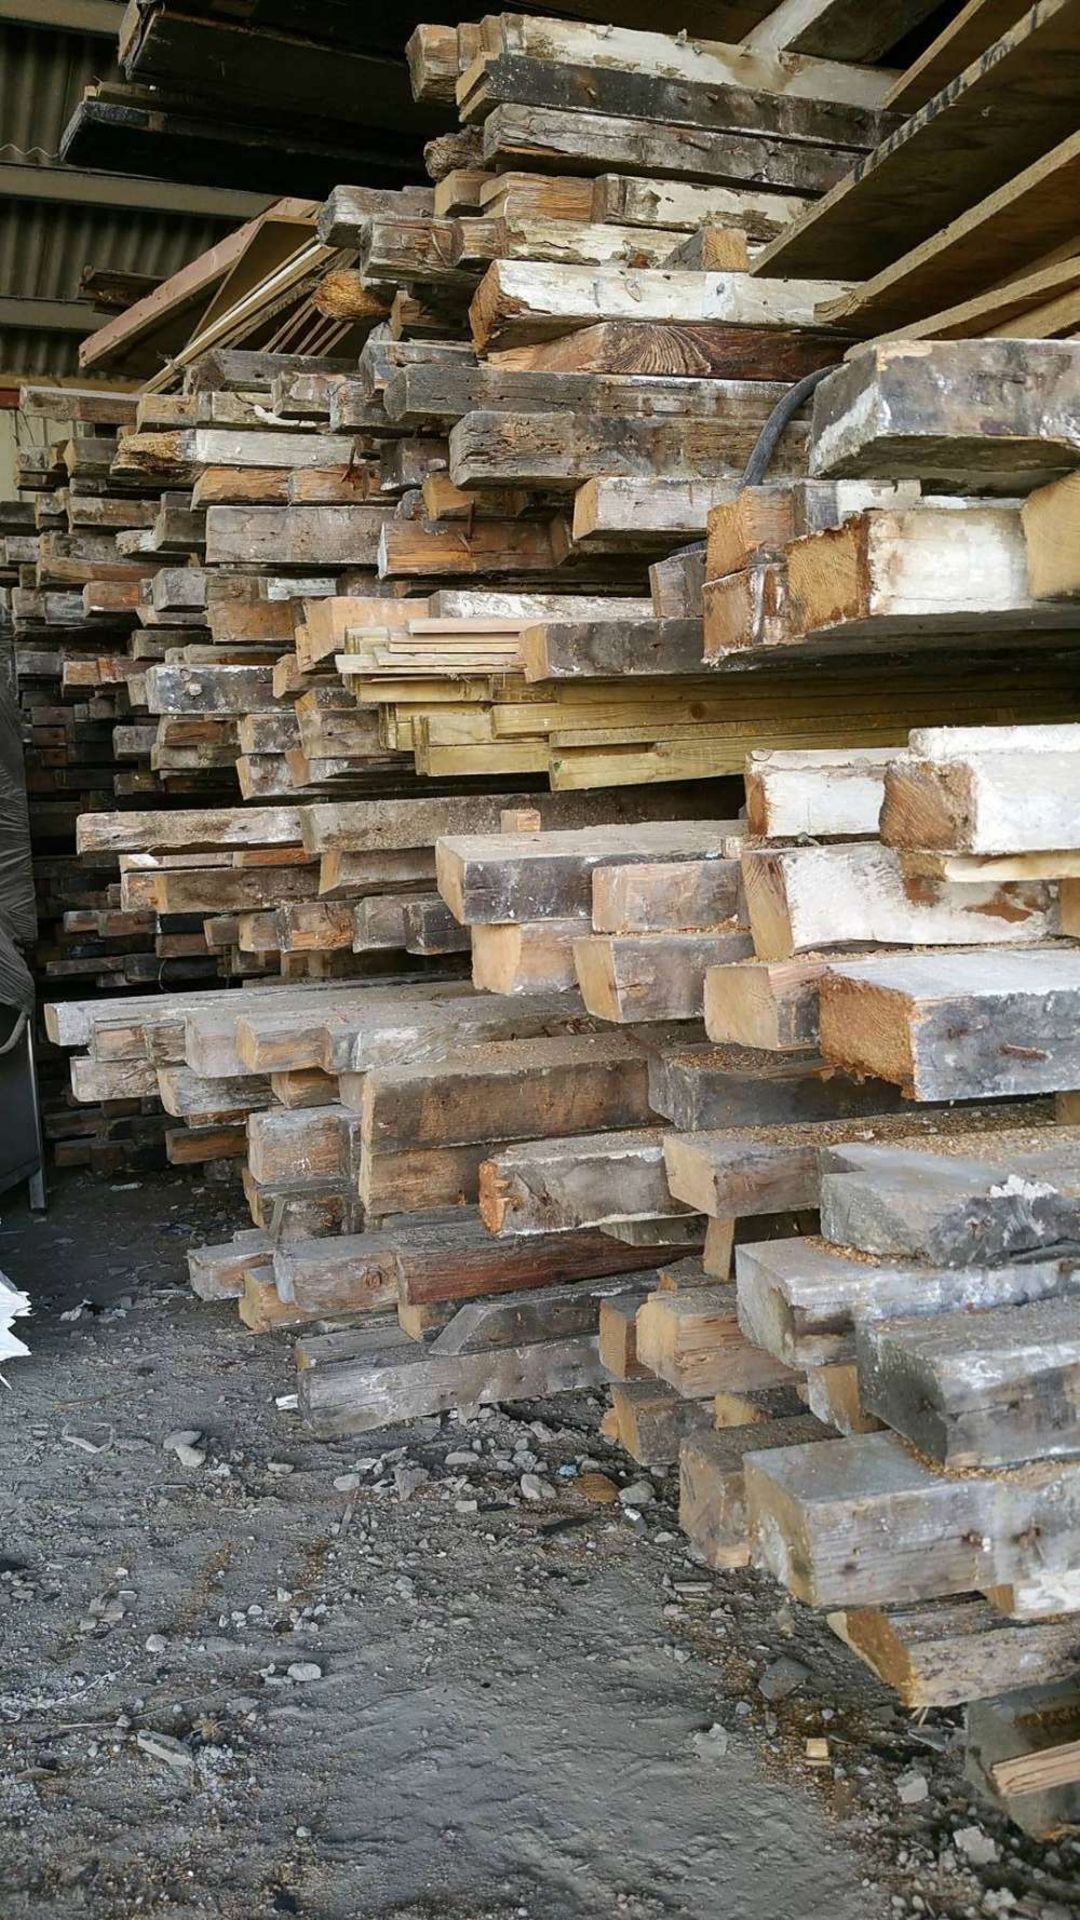 200 year old approx joist timbers taken from a warehouse in clink street, london. - Image 3 of 4